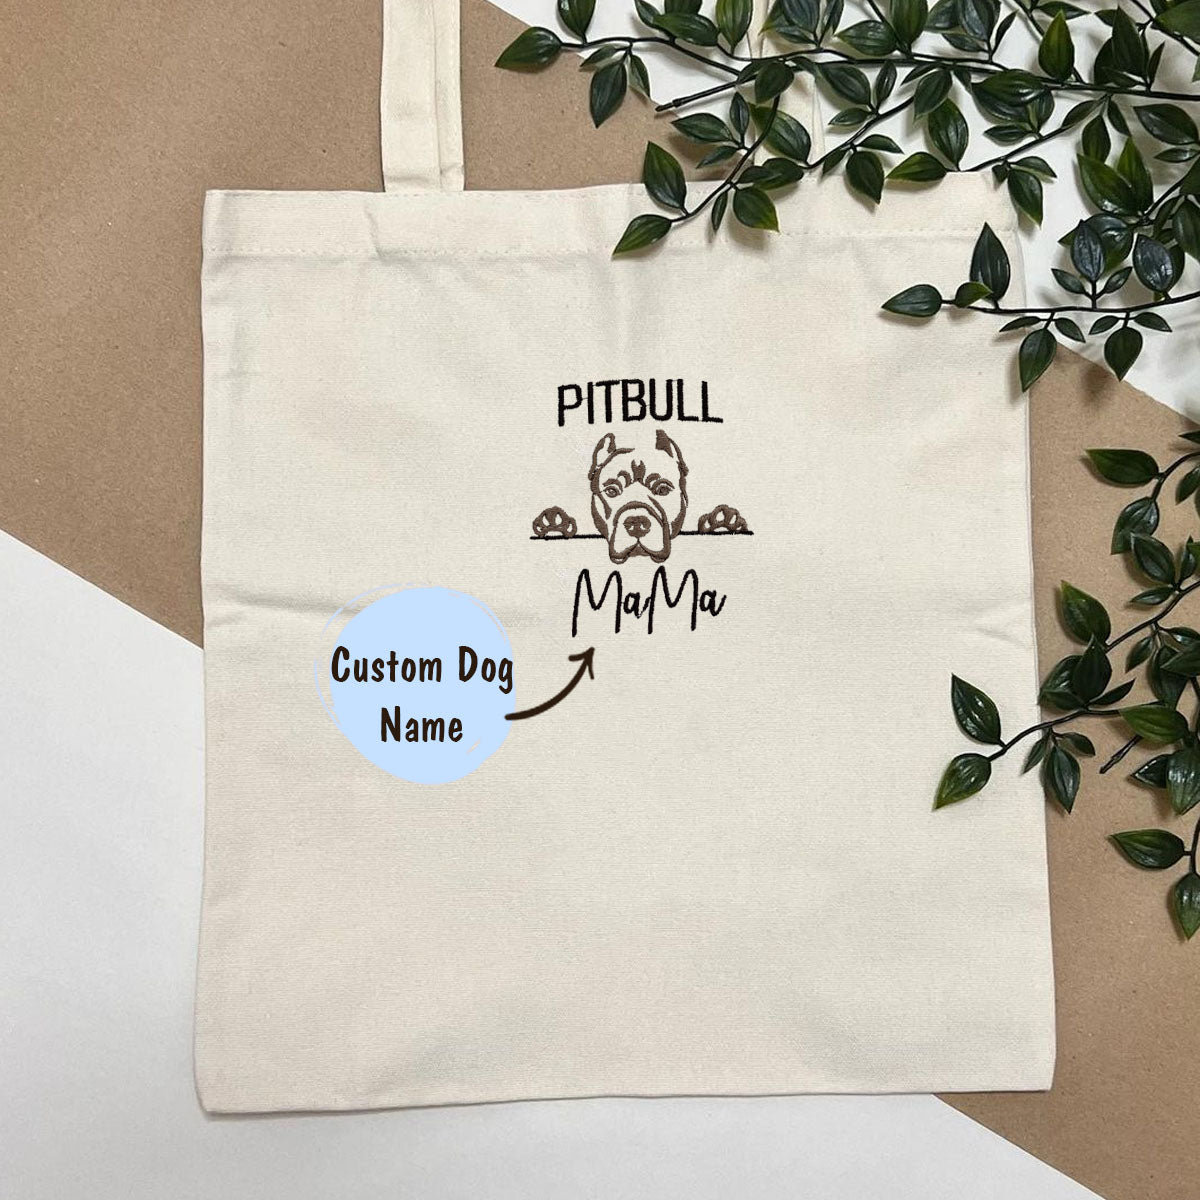 Custom Pitbull Dog Mama Embroidered Tote Bag, Personalized Tote Bag with Dog Name, Best Gifts for Pitbull Lovers